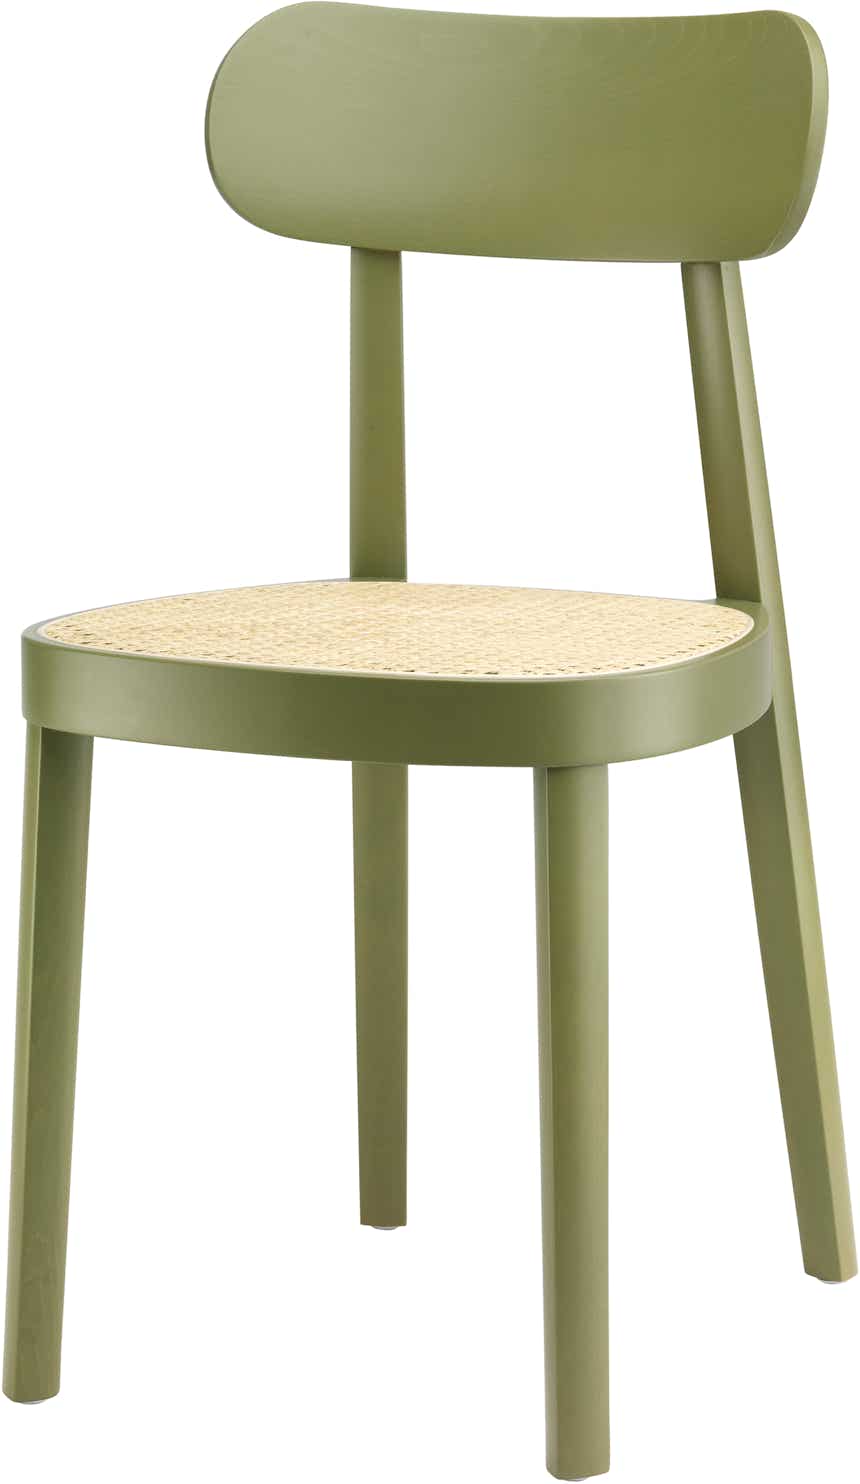 118 / 118 F chair (cane seat) Olive green beech